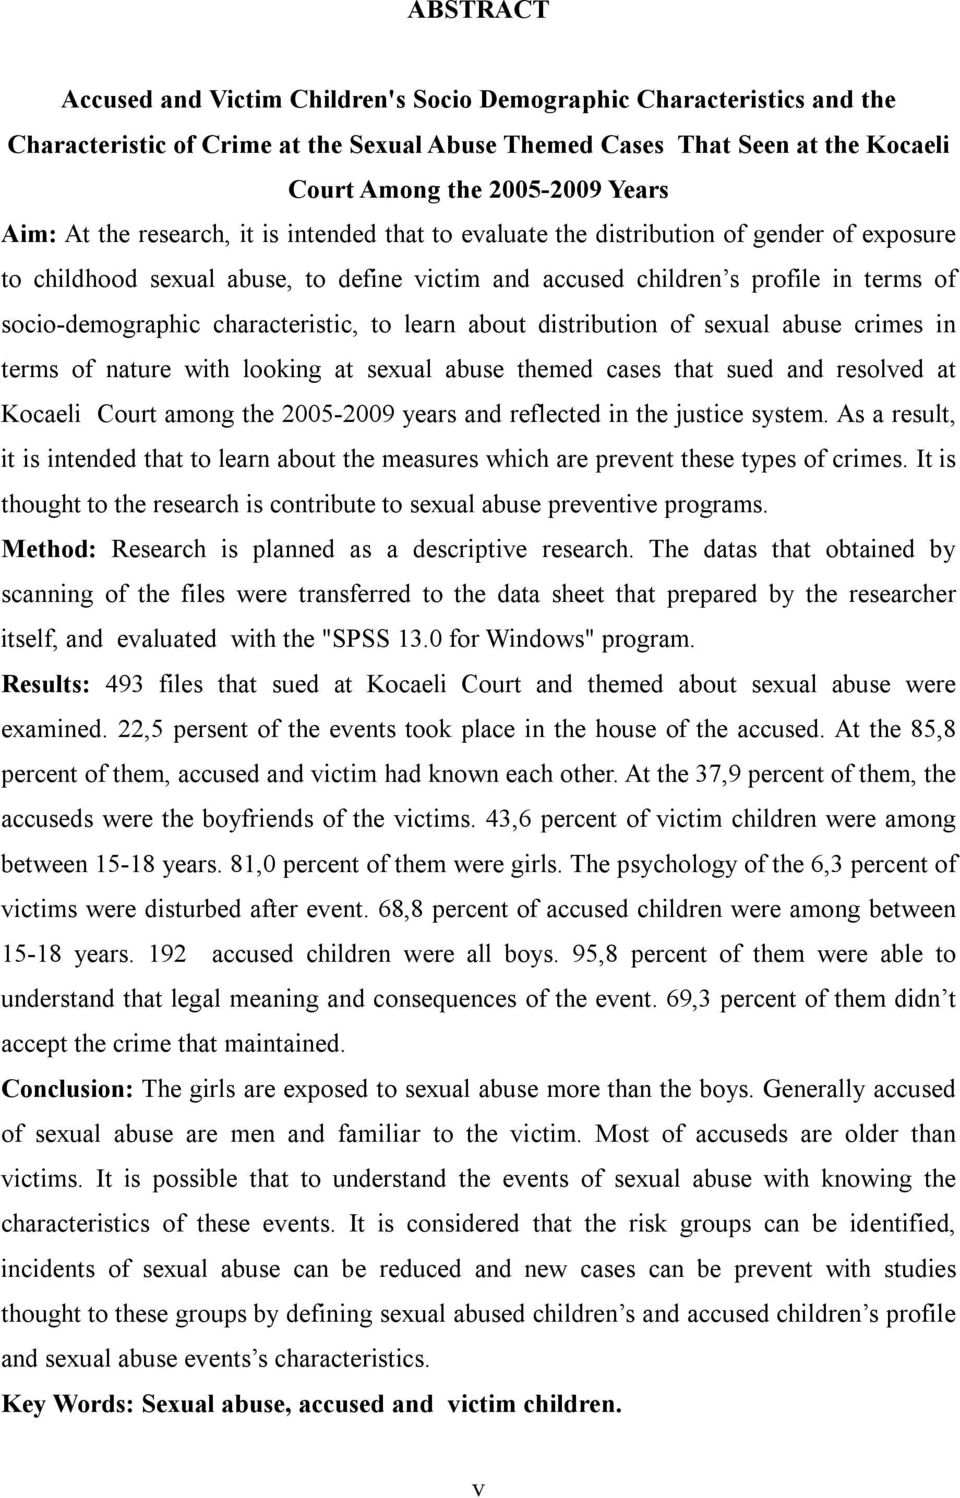 characteristic, to learn about distribution of sexual abuse crimes in terms of nature with looking at sexual abuse themed cases that sued and resolved at Kocaeli Court among the 2005-2009 years and